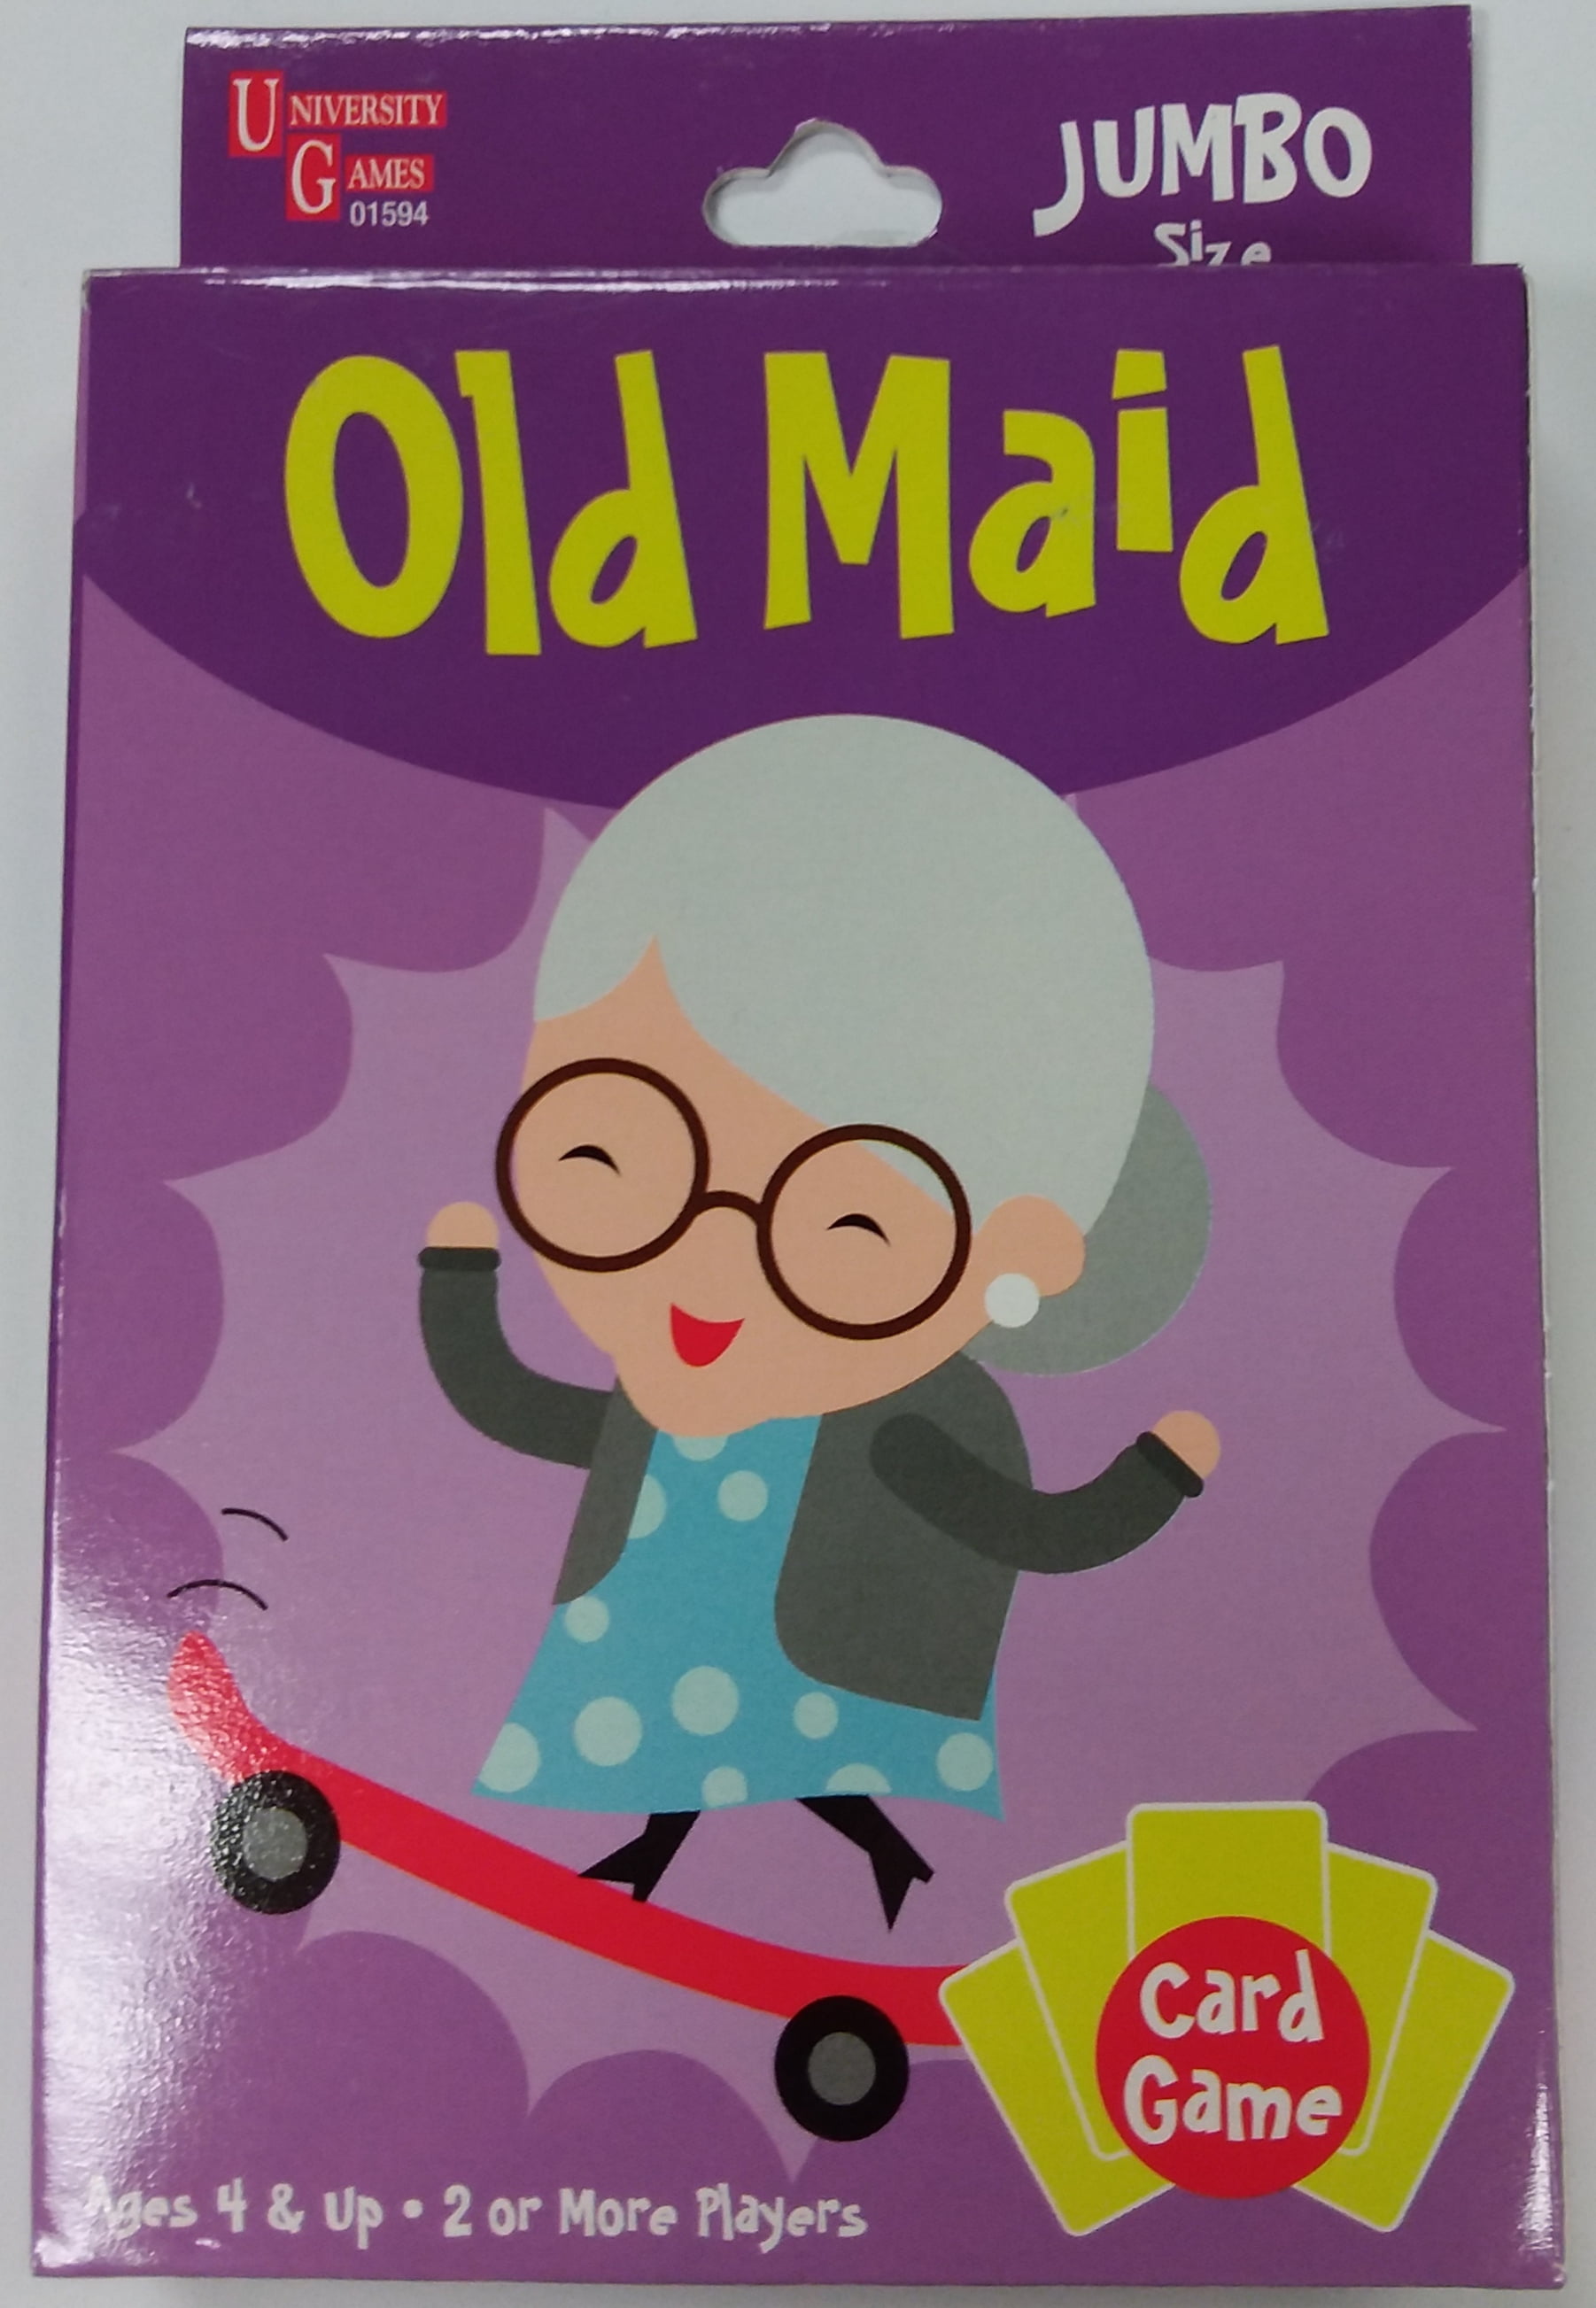 educator cards old maid